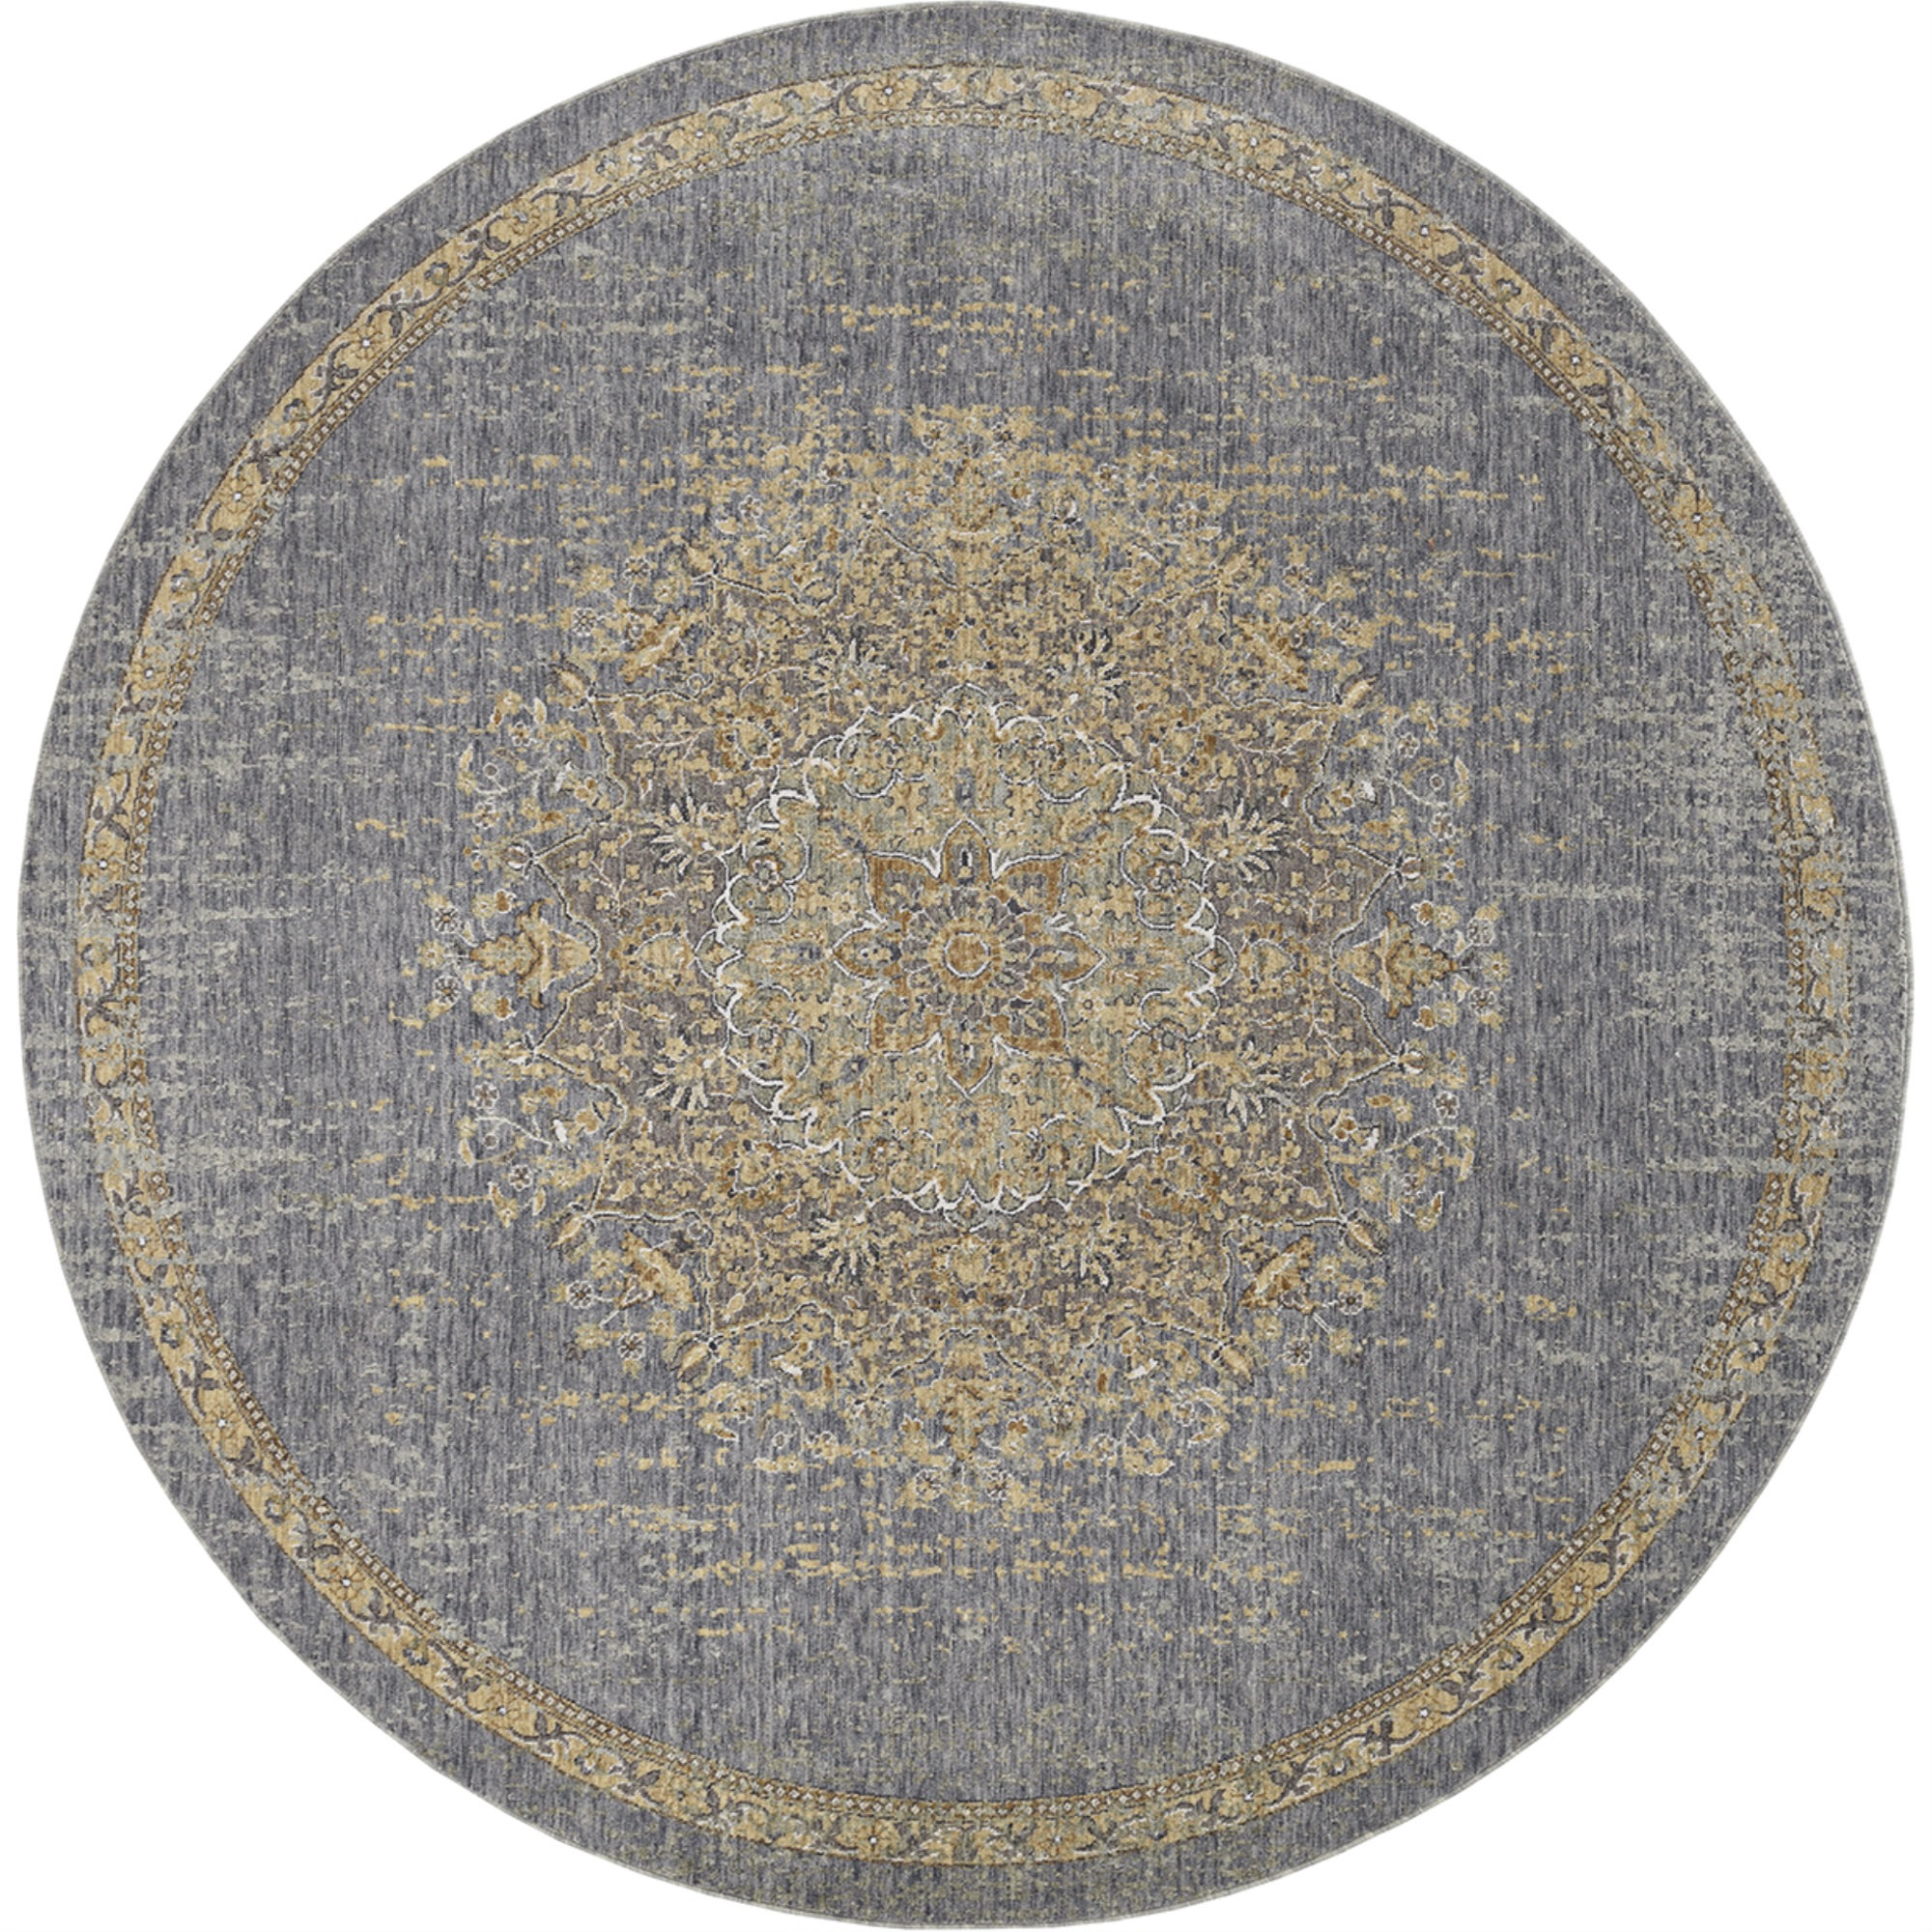 Whirley Wool Rug - Oyster